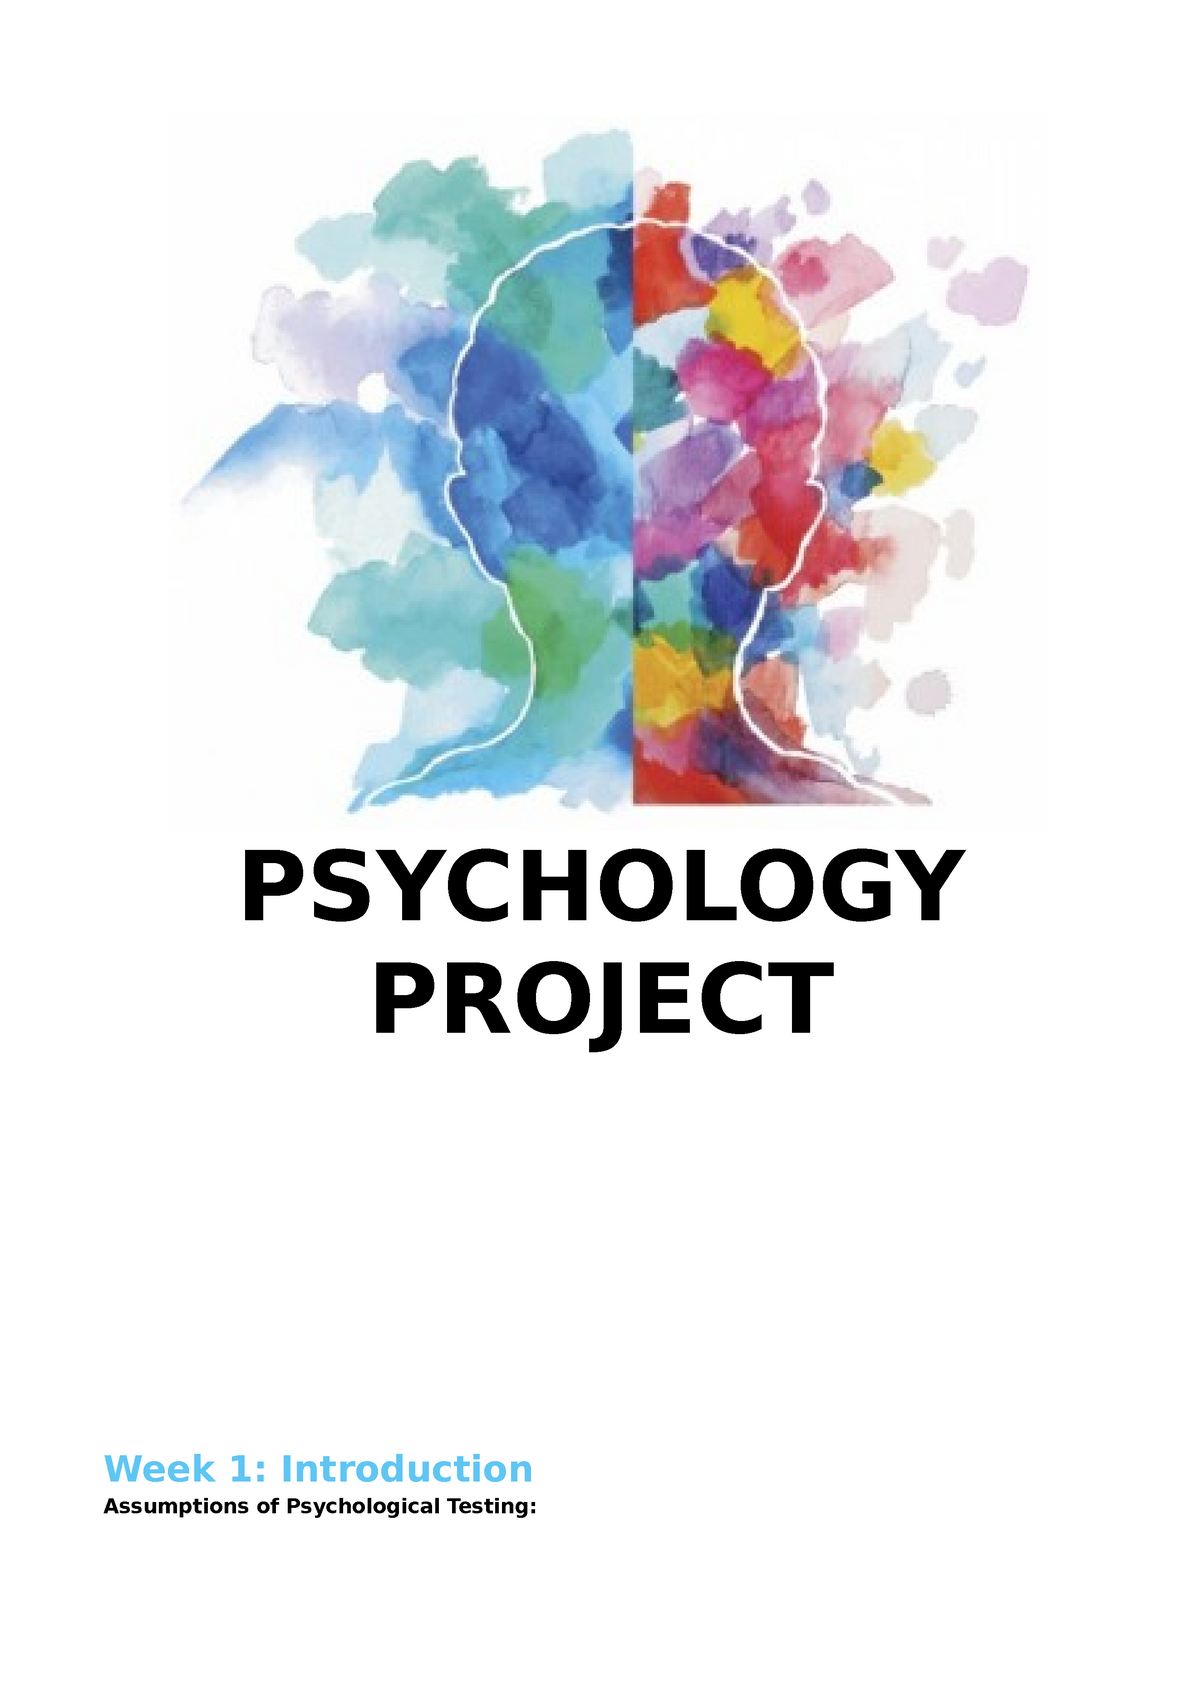 research project ideas for psychology